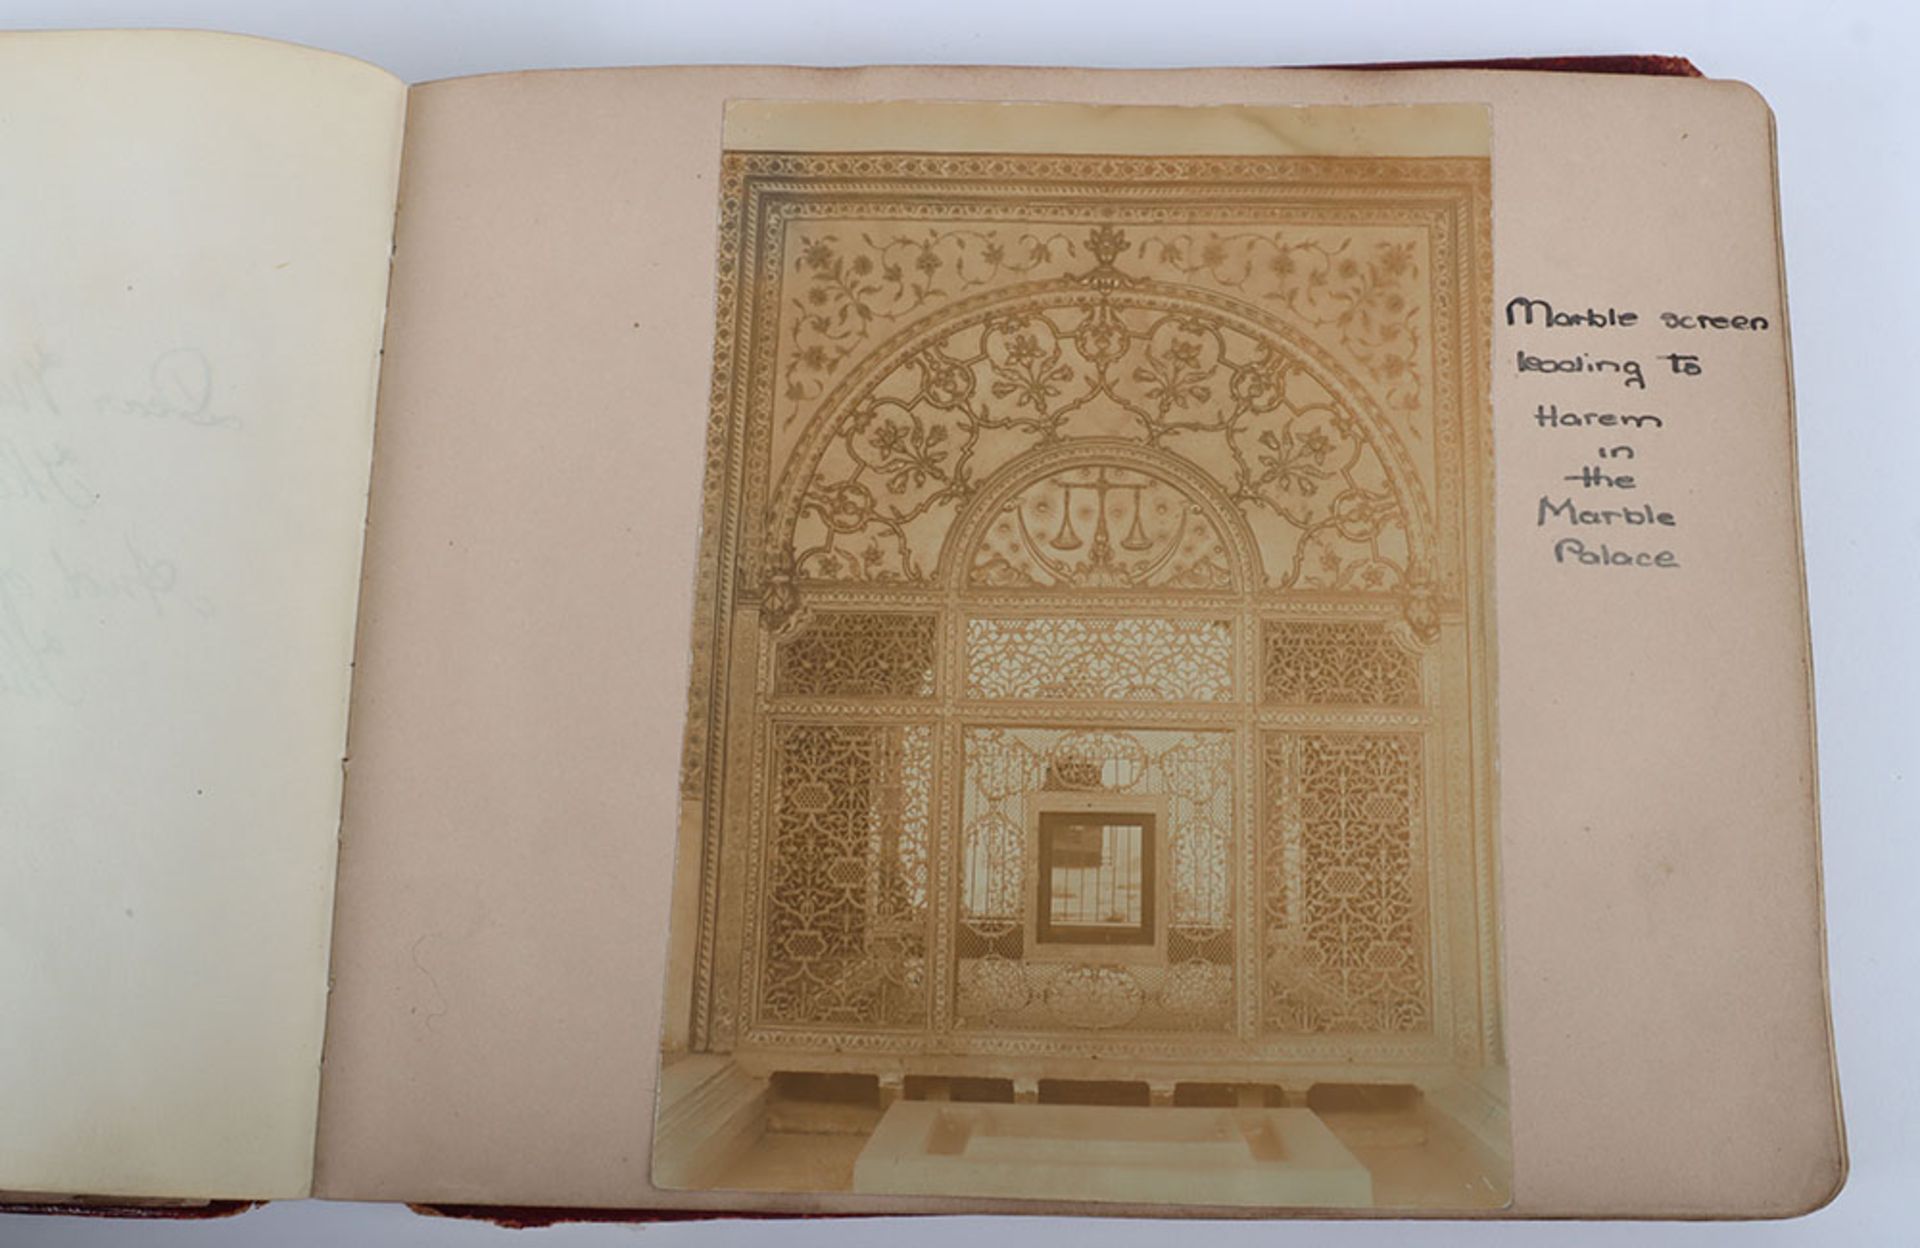 Photograph Album with images of ther Delhi Durbar, troops lining streets, Elephants, sacred cows bel - Image 25 of 48